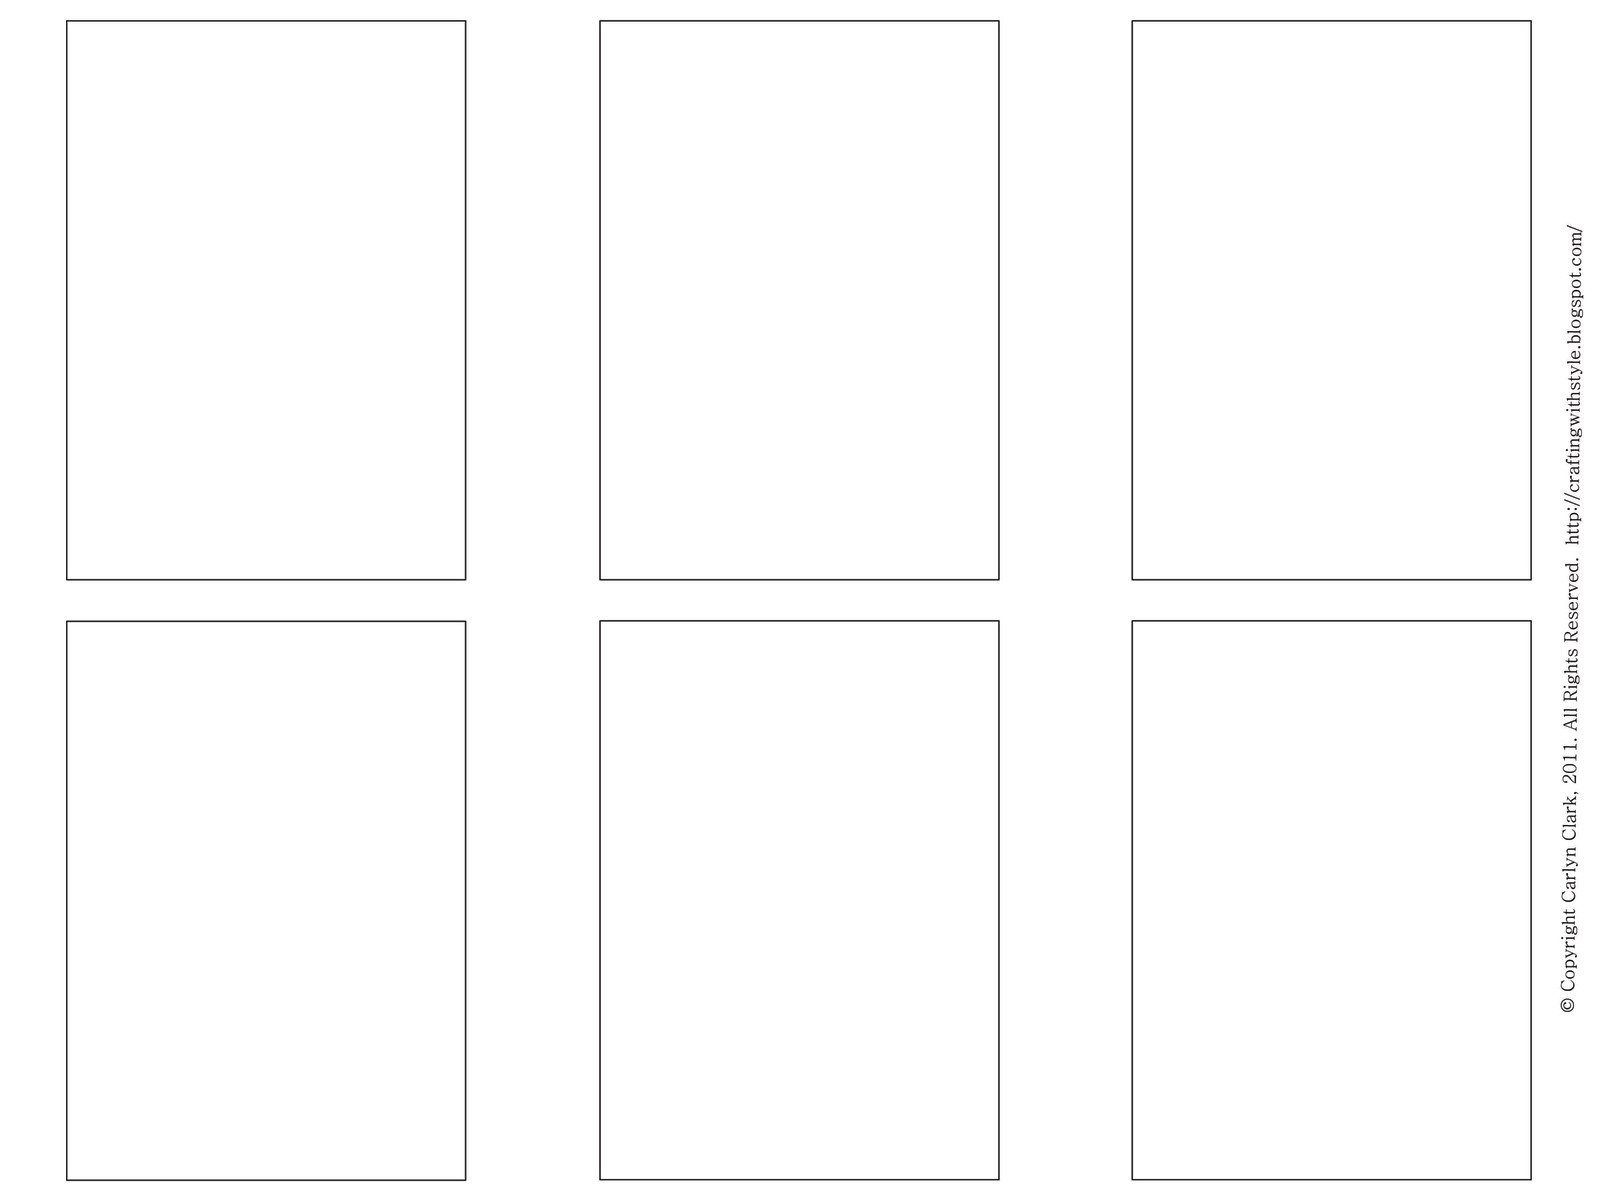 Blank Trading Card Template Crafting with Style Free atc Templates and Artwork for atc S